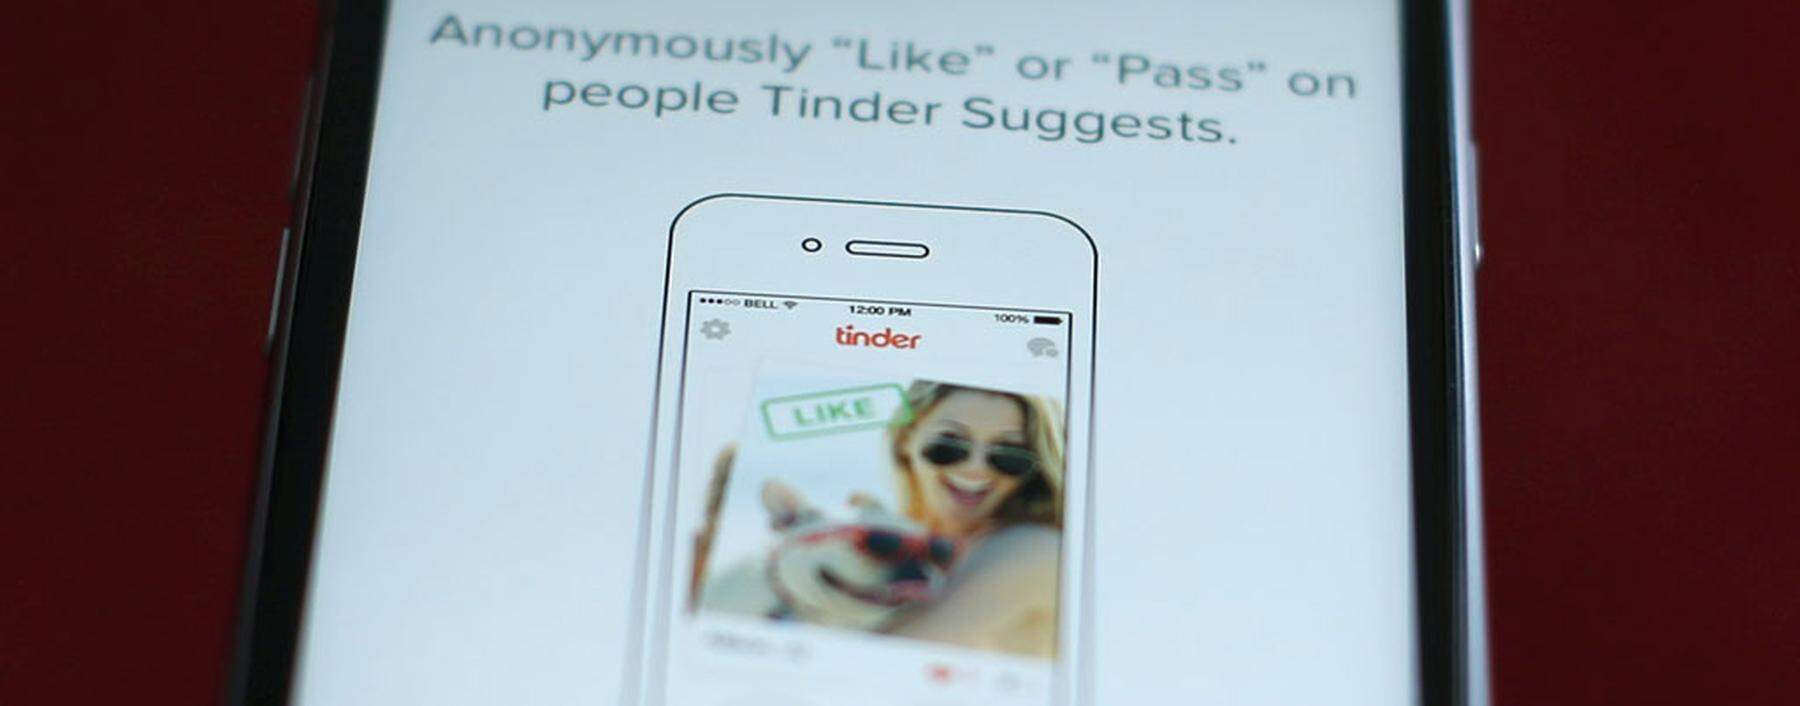 Photo illustration of dating app Tinder shown on an Apple iPhone